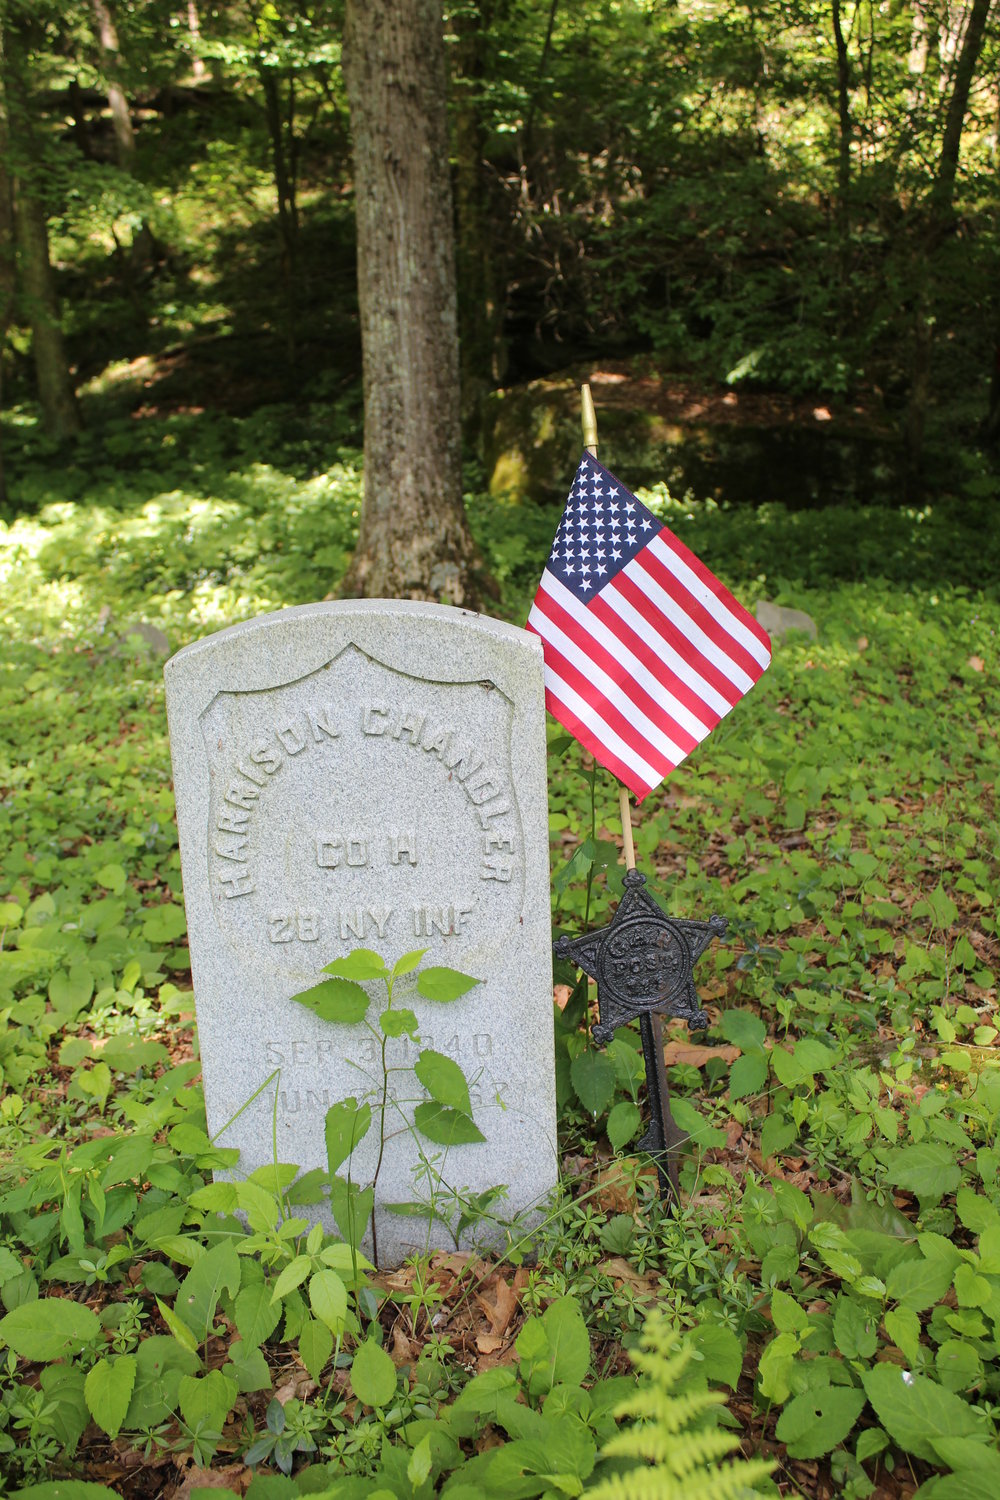 Harrison Chandler died of typhoid fever in a Confederate hospital. He and his brother, John, were both buried in unmarked graves in a cemetery near Rock Valley, NY. A century and a half later, they both received headstones from the Veterans Administration, and in 2018, a ceremony saw their final resting places marked. Pictured here is Harrison Chandler's new marker.